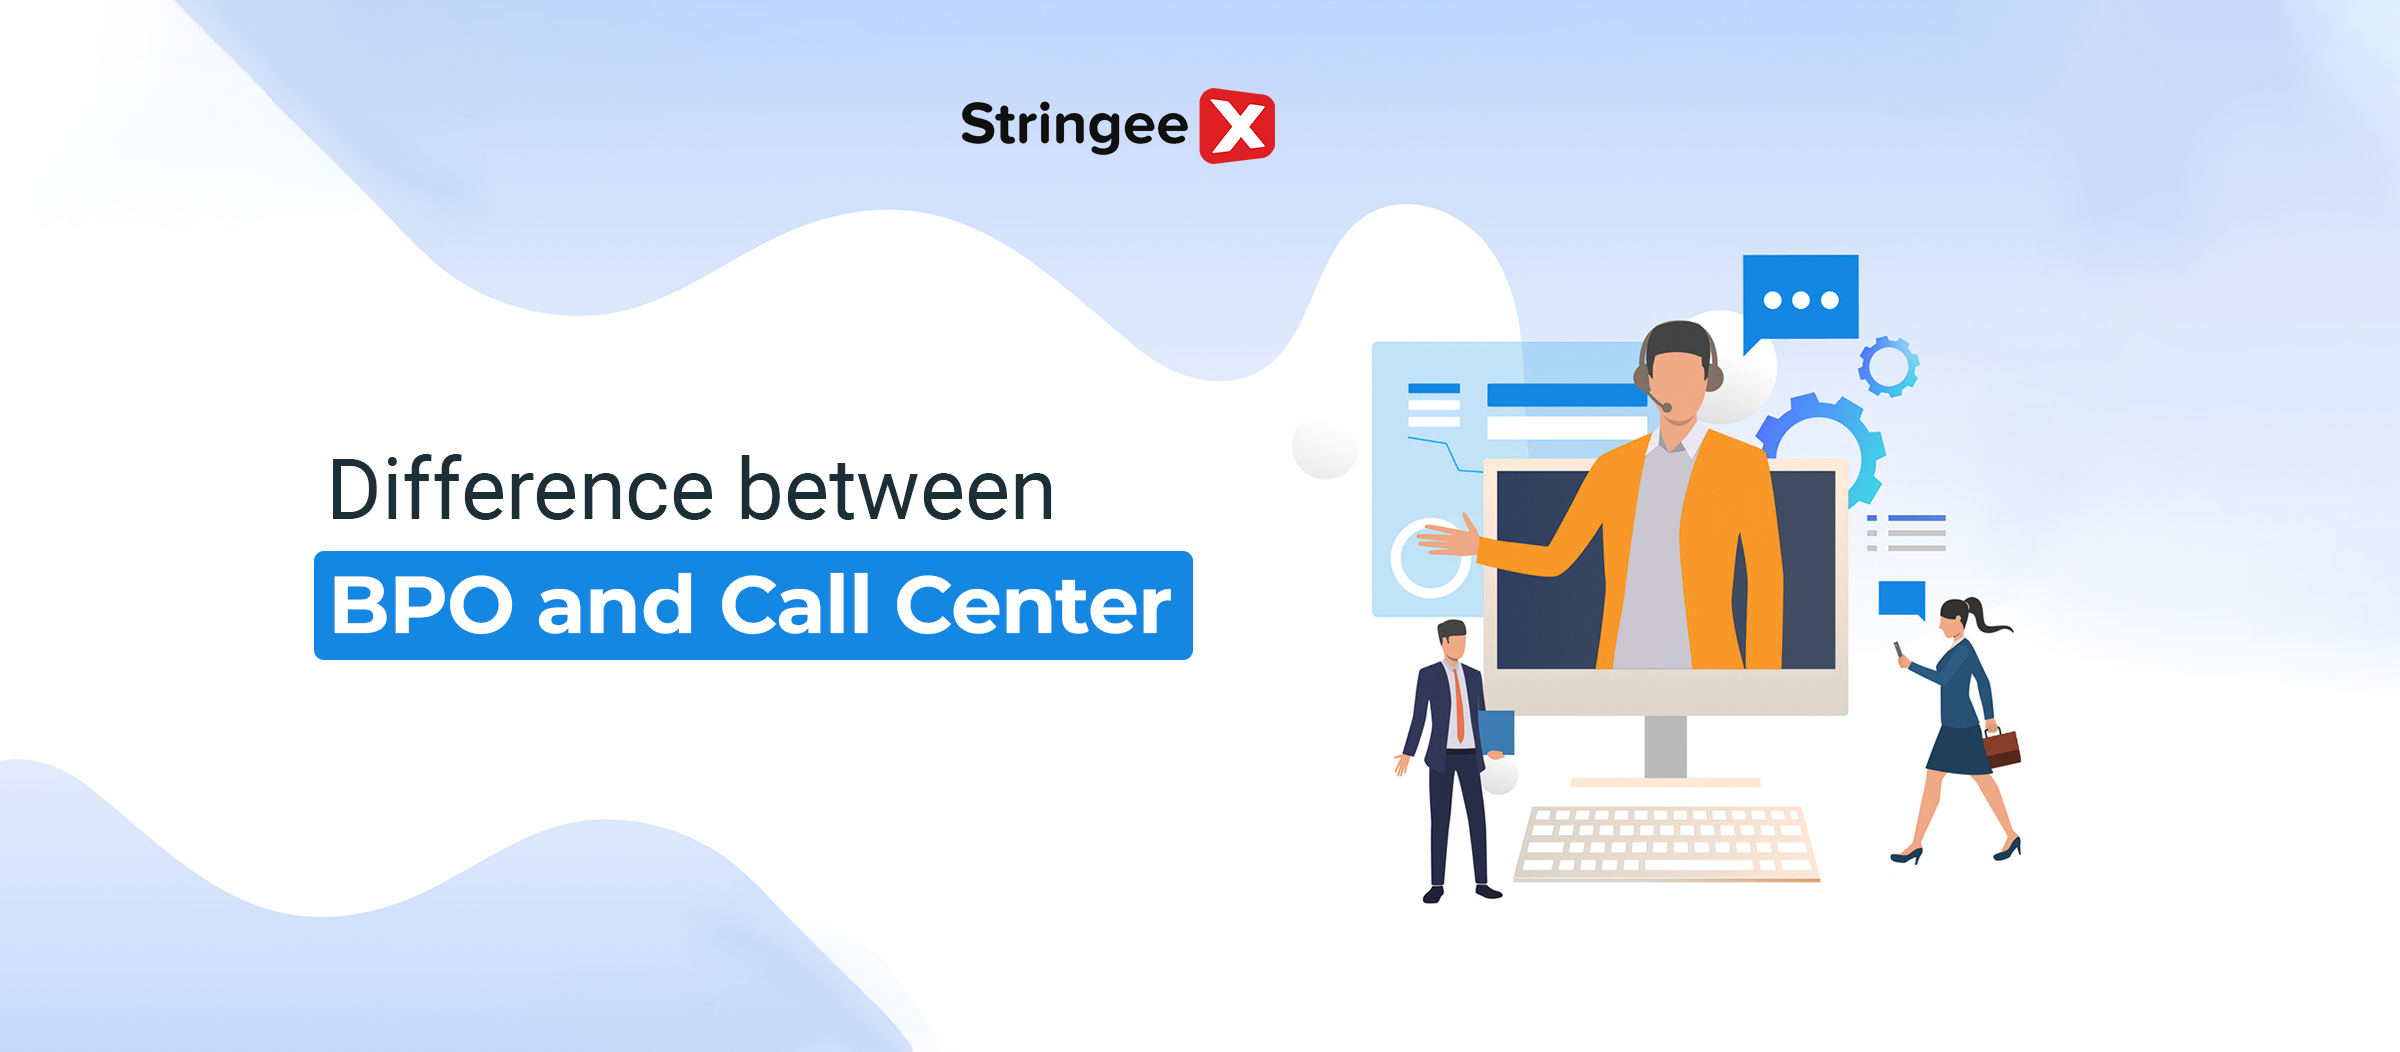 What Is The Difference Between BPO And Call Center?